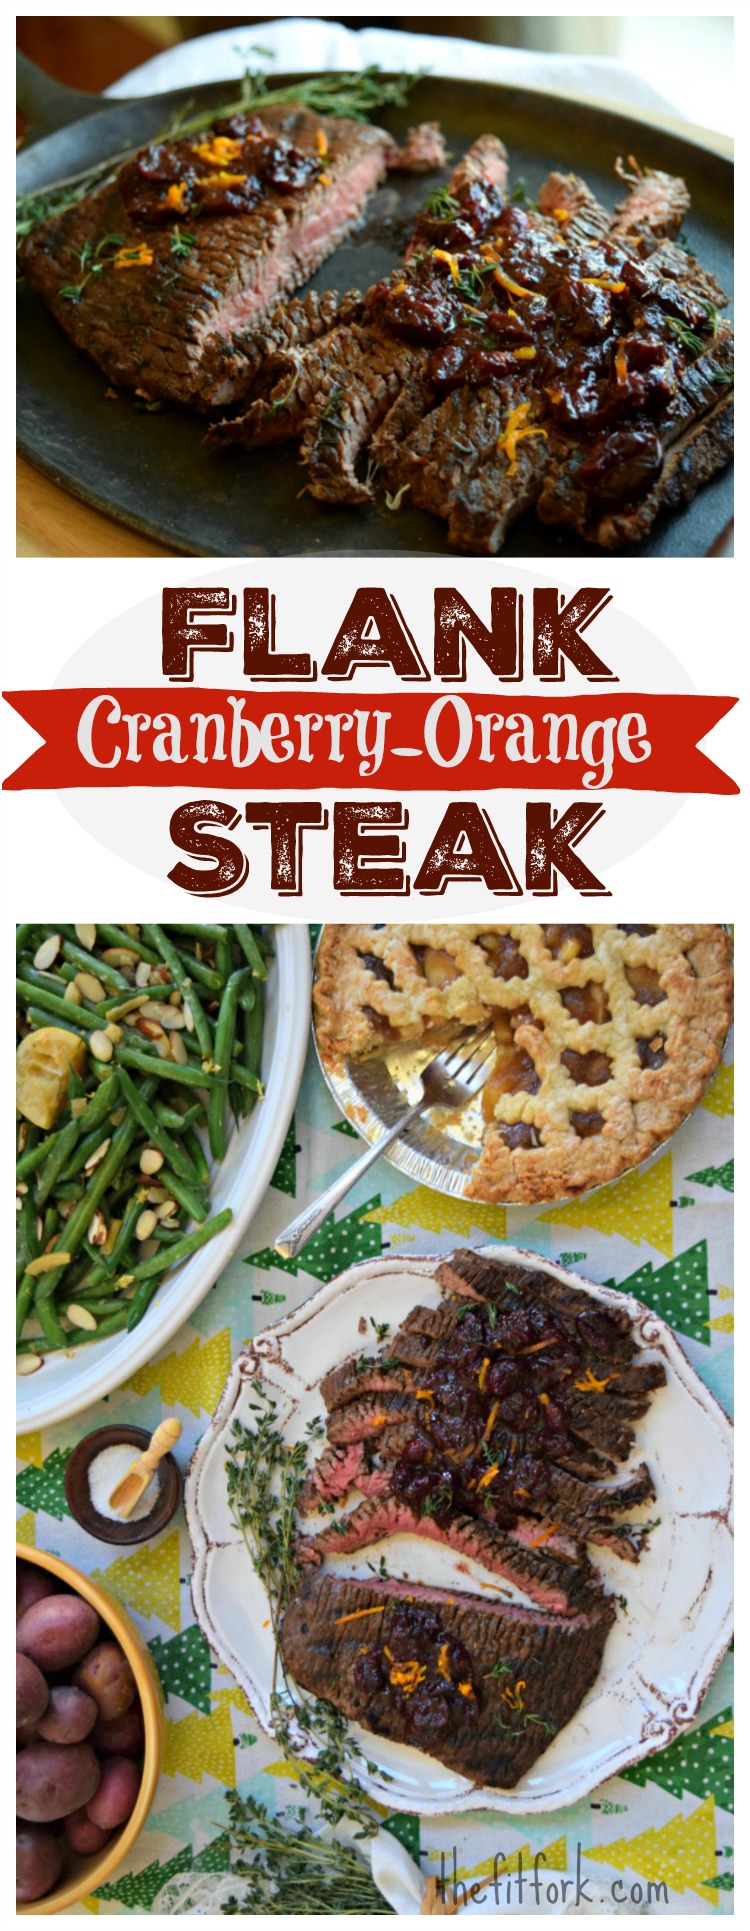 Cranberry Orange Flank Steak is a quick and easy meal for your family and guests. Make a new holiday tradition with this lean cut that can be grilled indoors or out!